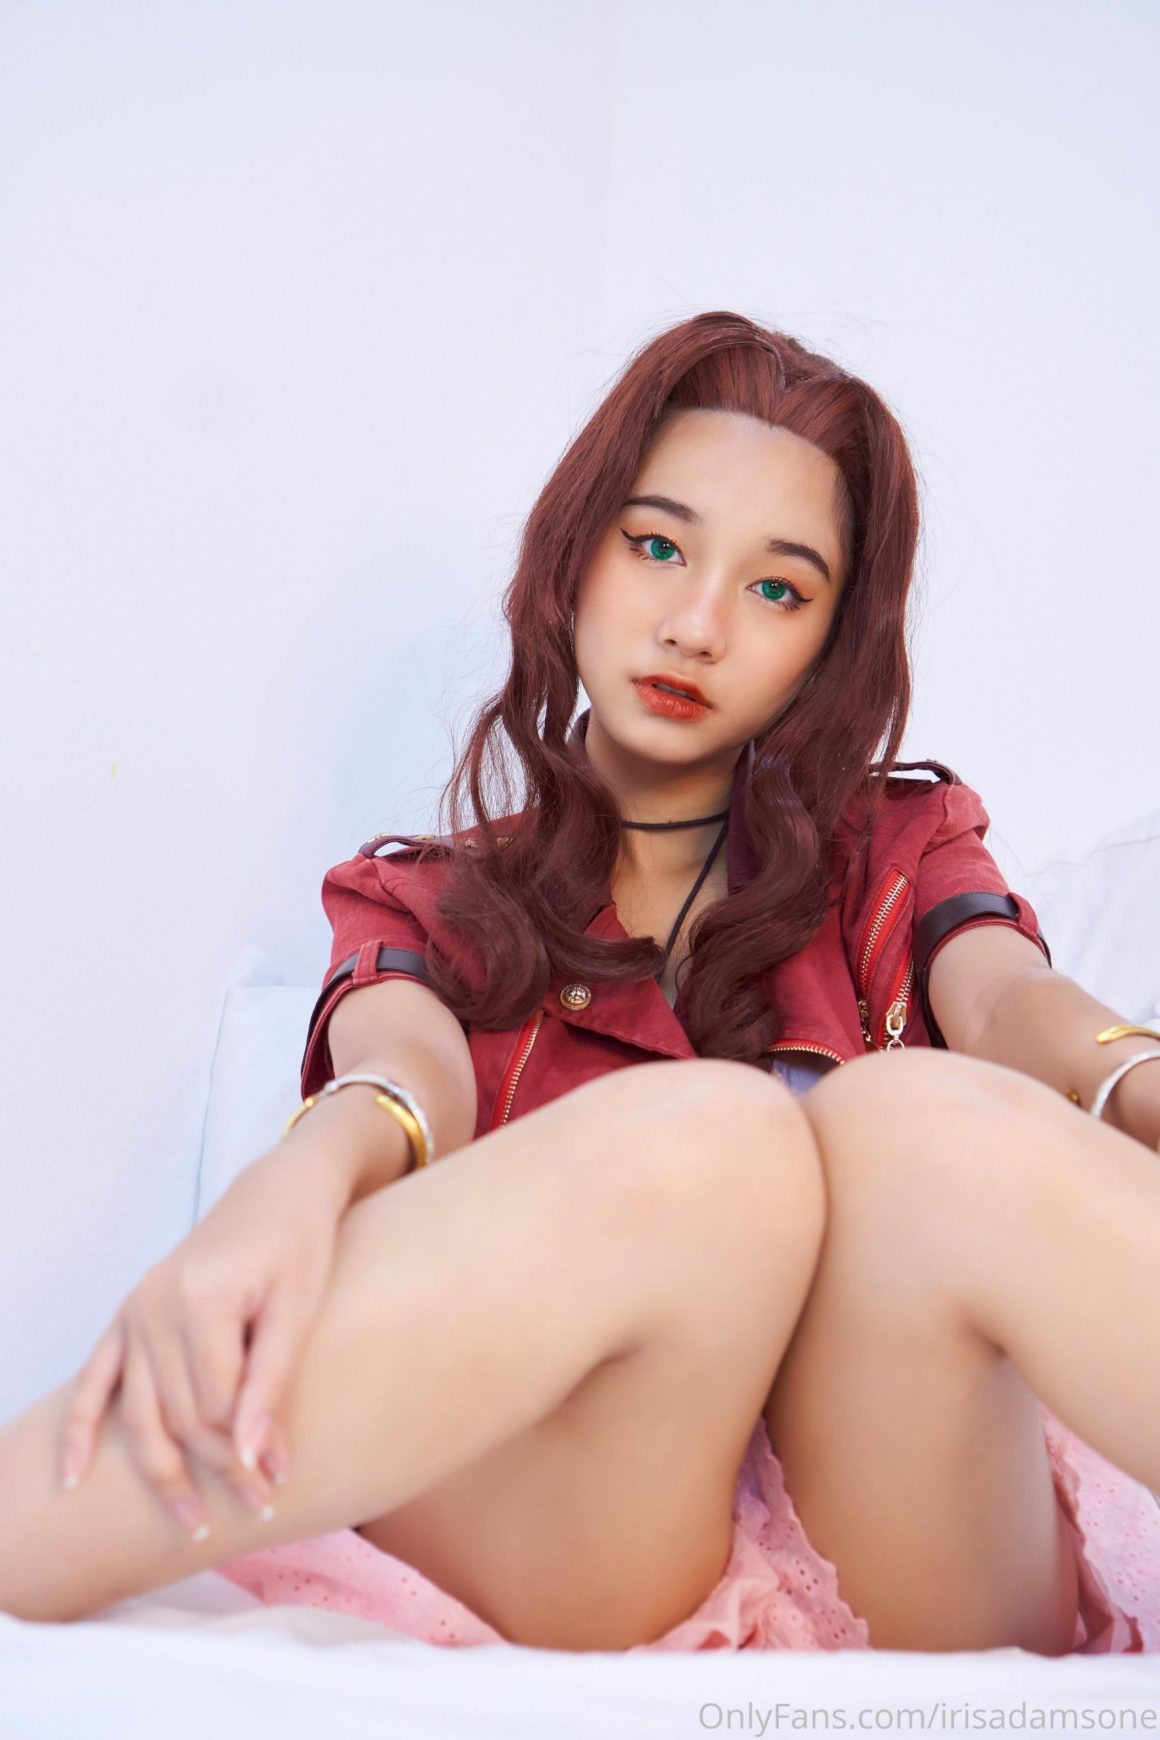 AsianOnlyfans 100 320 20210822 scaled